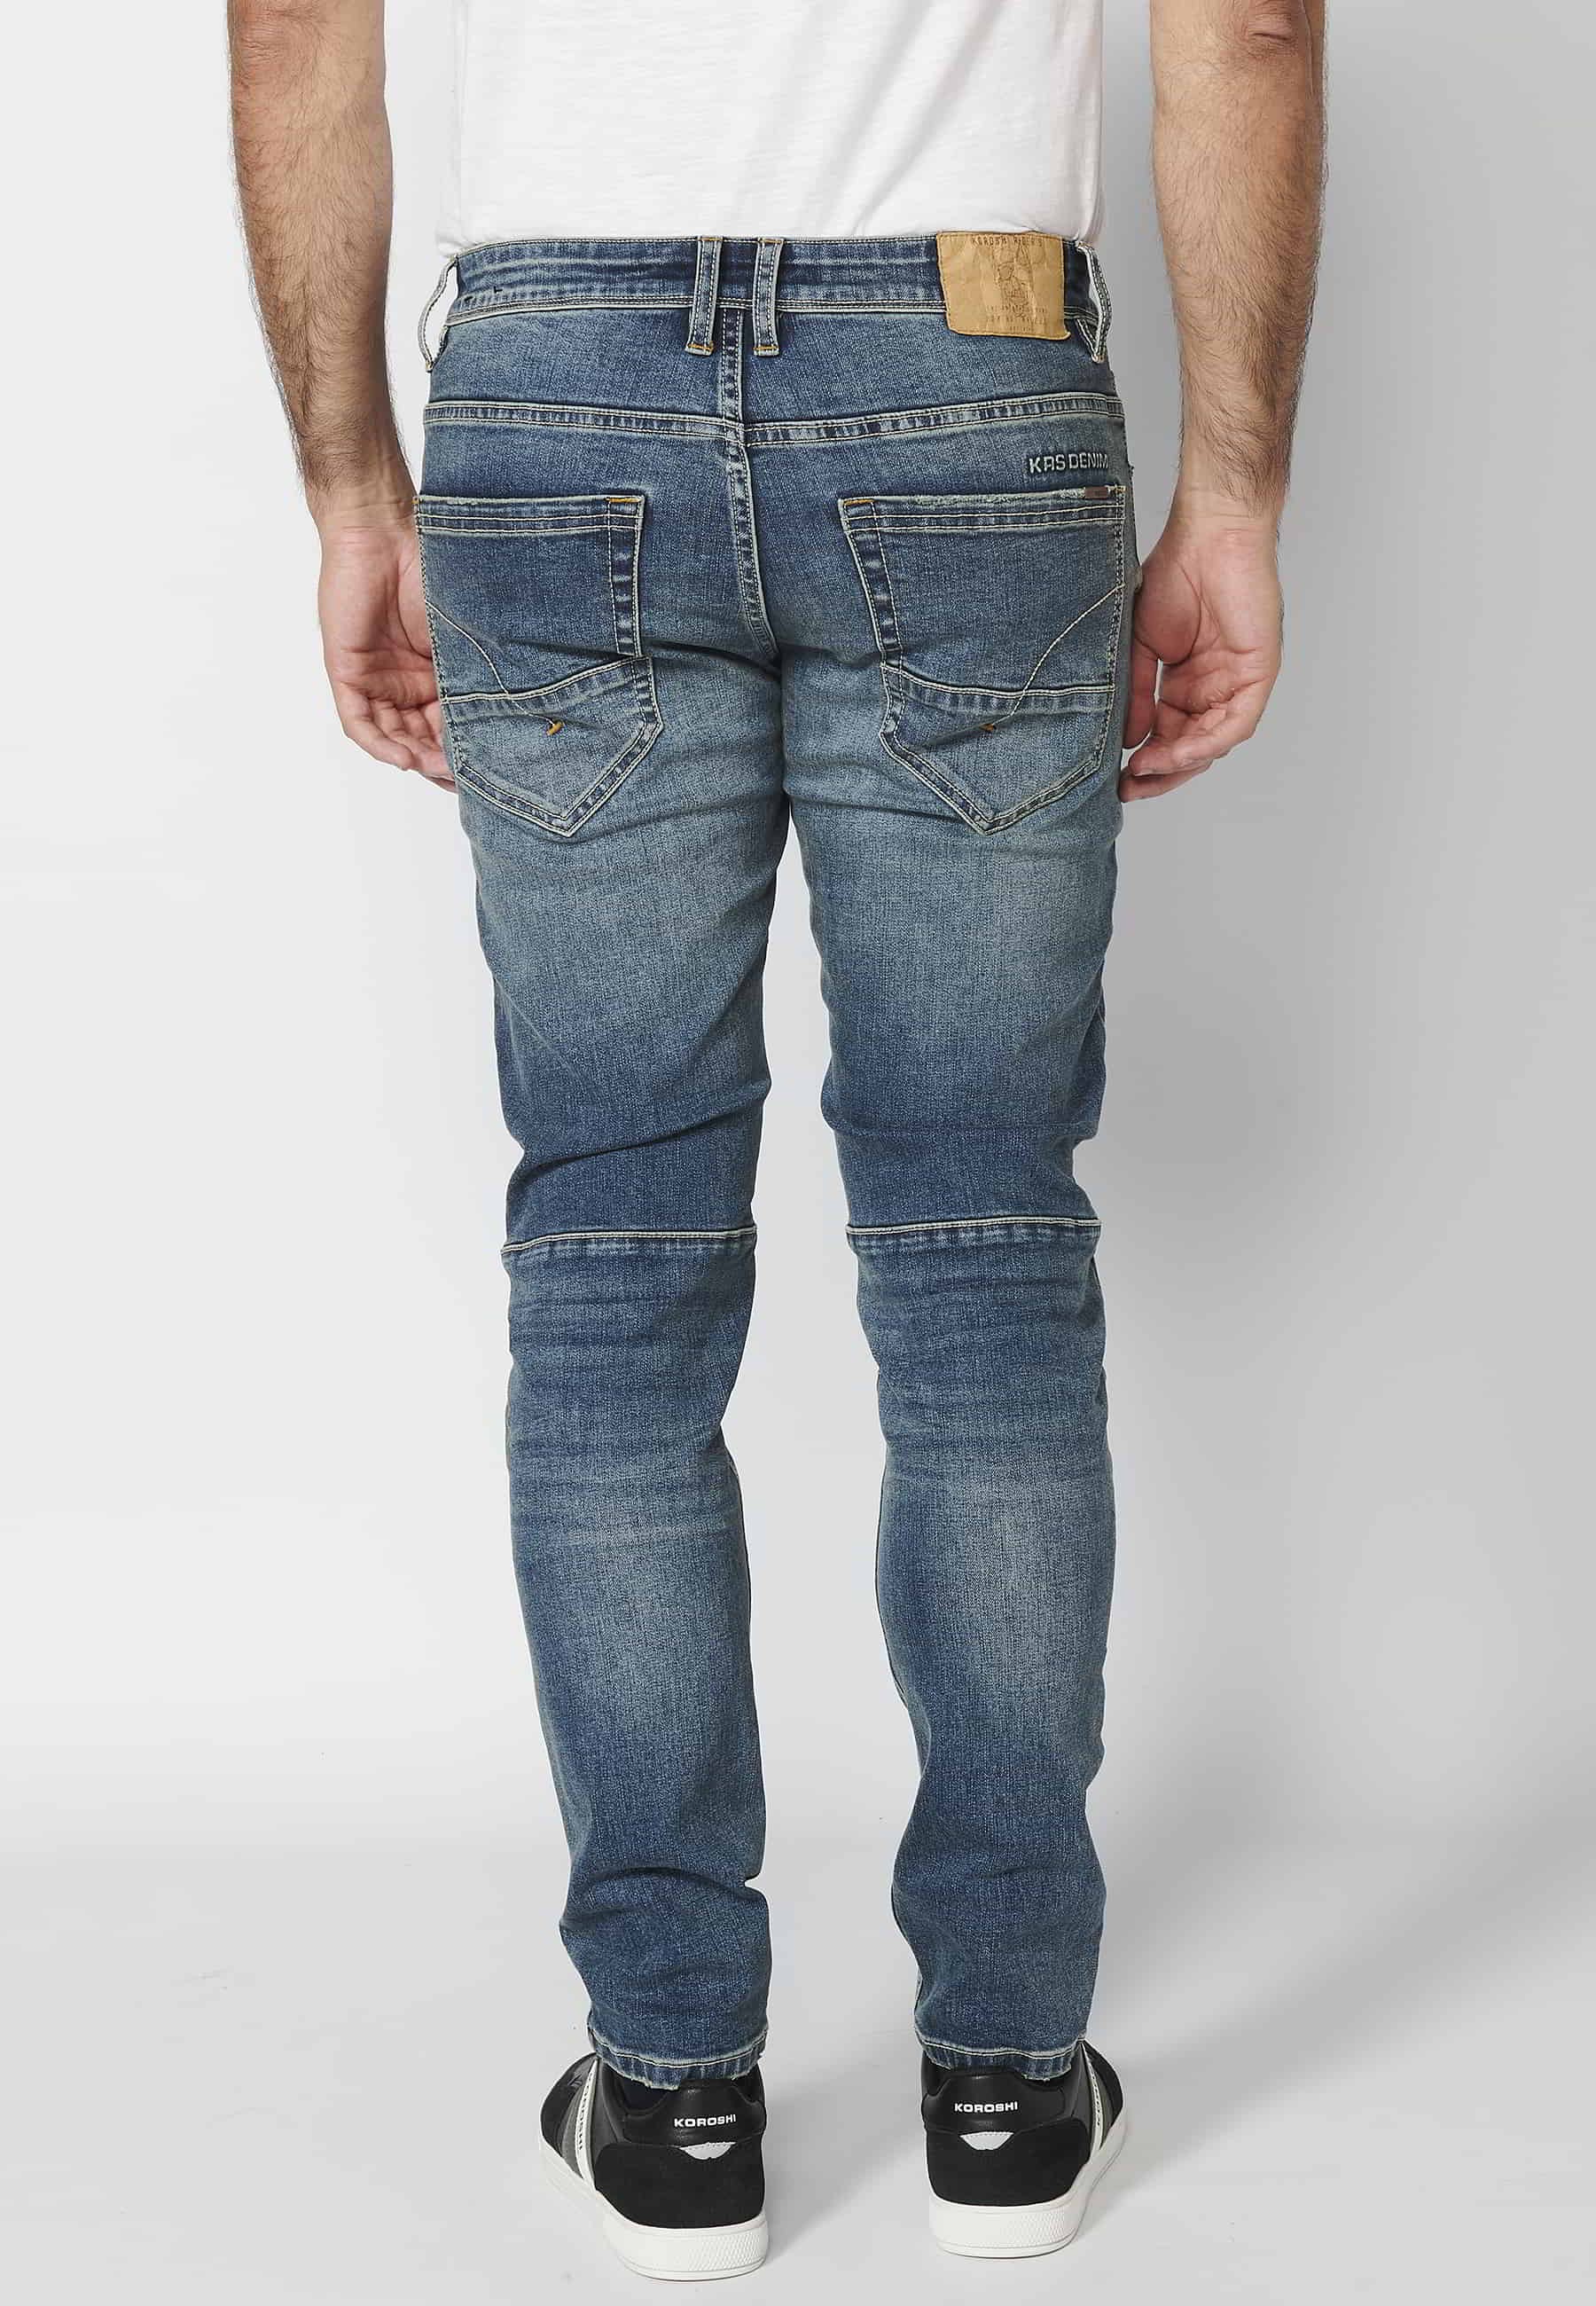 Blue skinny fit biker jean pants with details on the knees and five pockets for Men 2